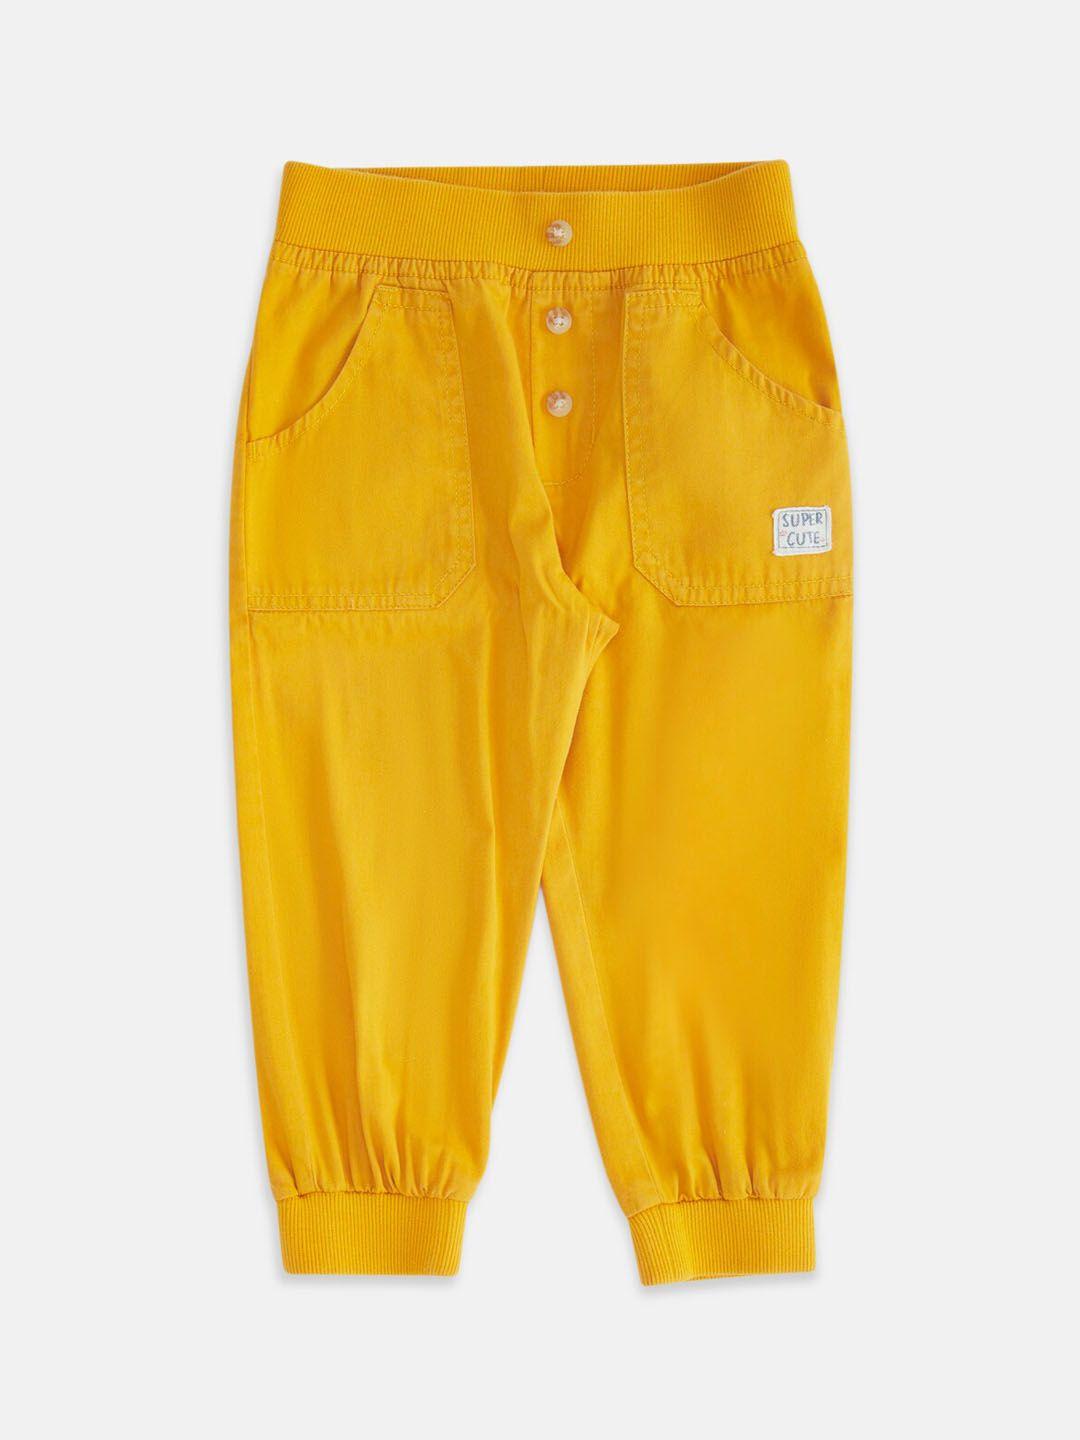 pantaloons-baby-boys-mustard-yellow-low-rise-joggers-trousers